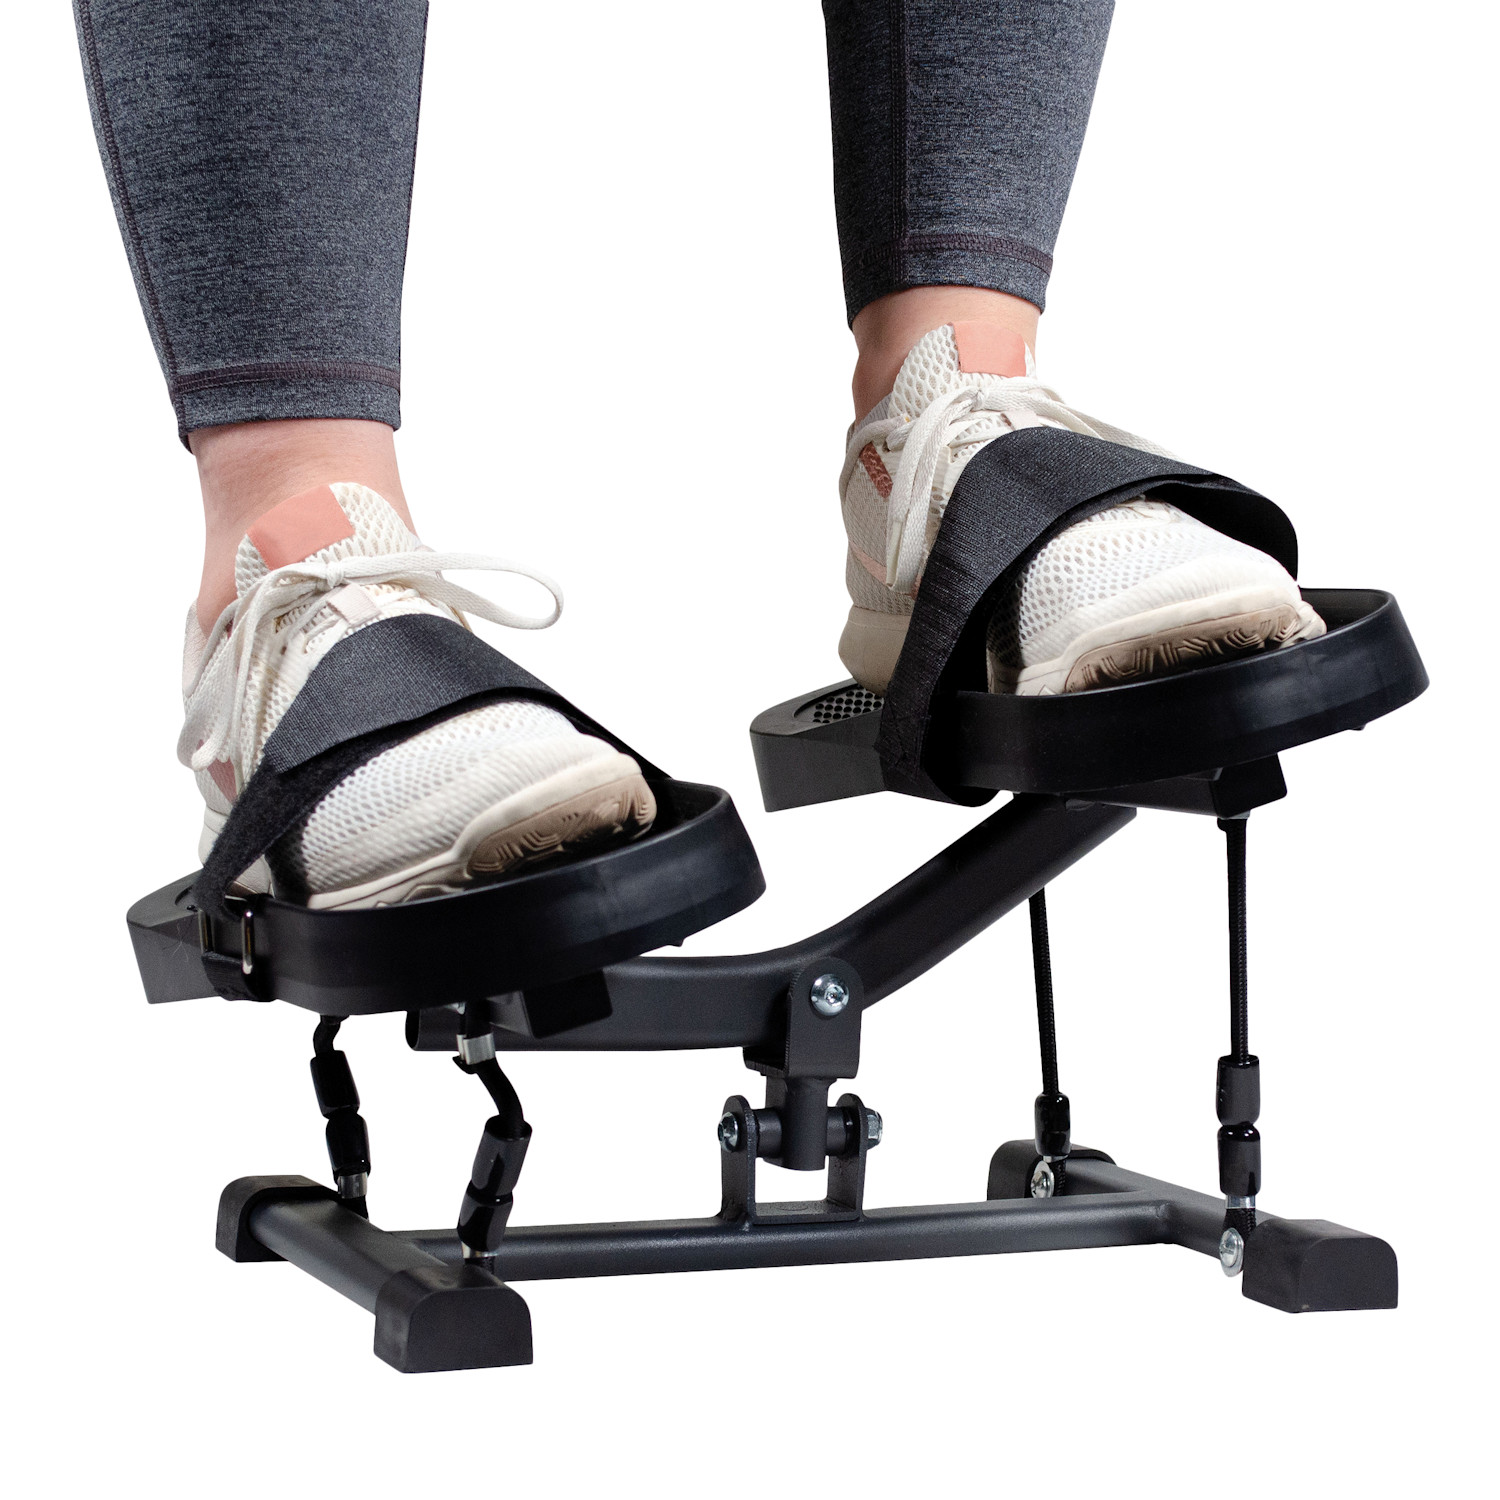 Angel Ankles Two Way Exerciser | Support Plus